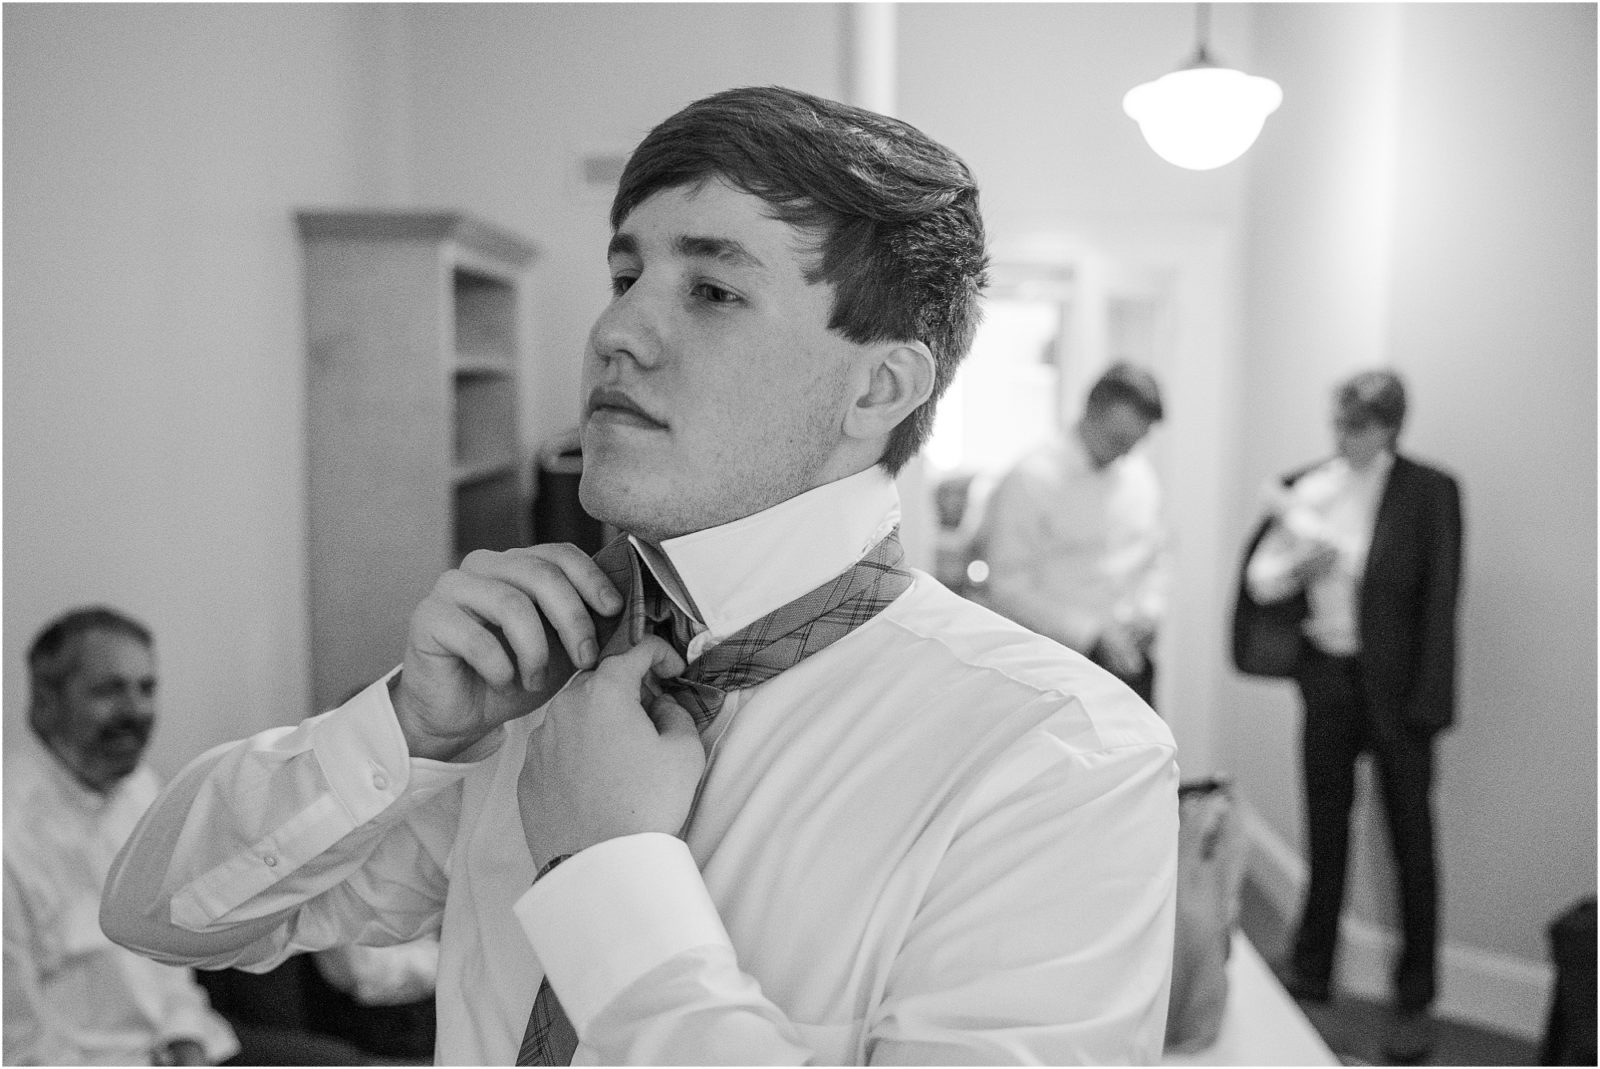 Guy putting on tie for wedding